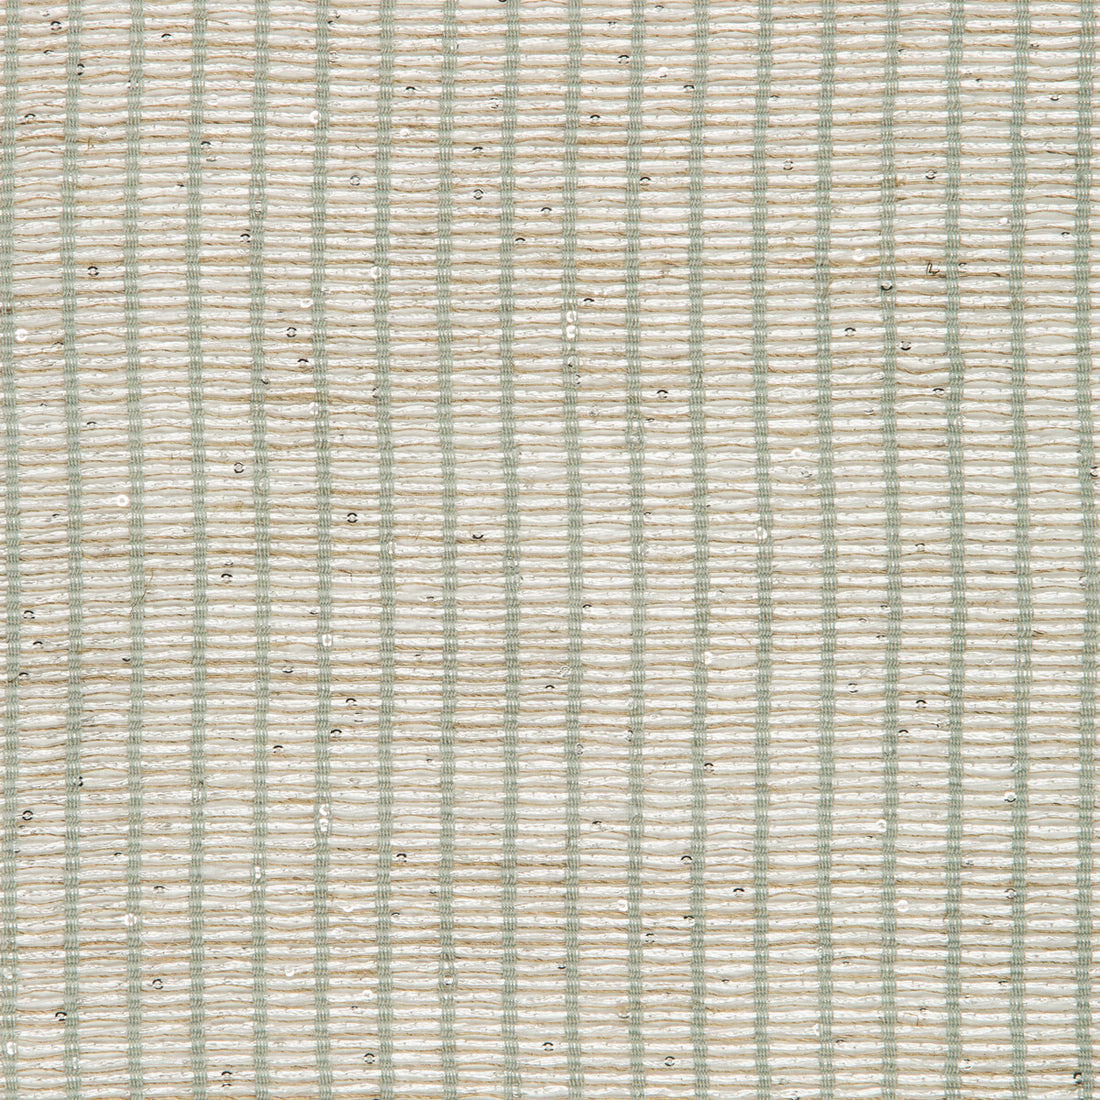 Leno Shine fabric in skylight color - pattern 4620.135.0 - by Kravet Couture in the Izu Collection collection